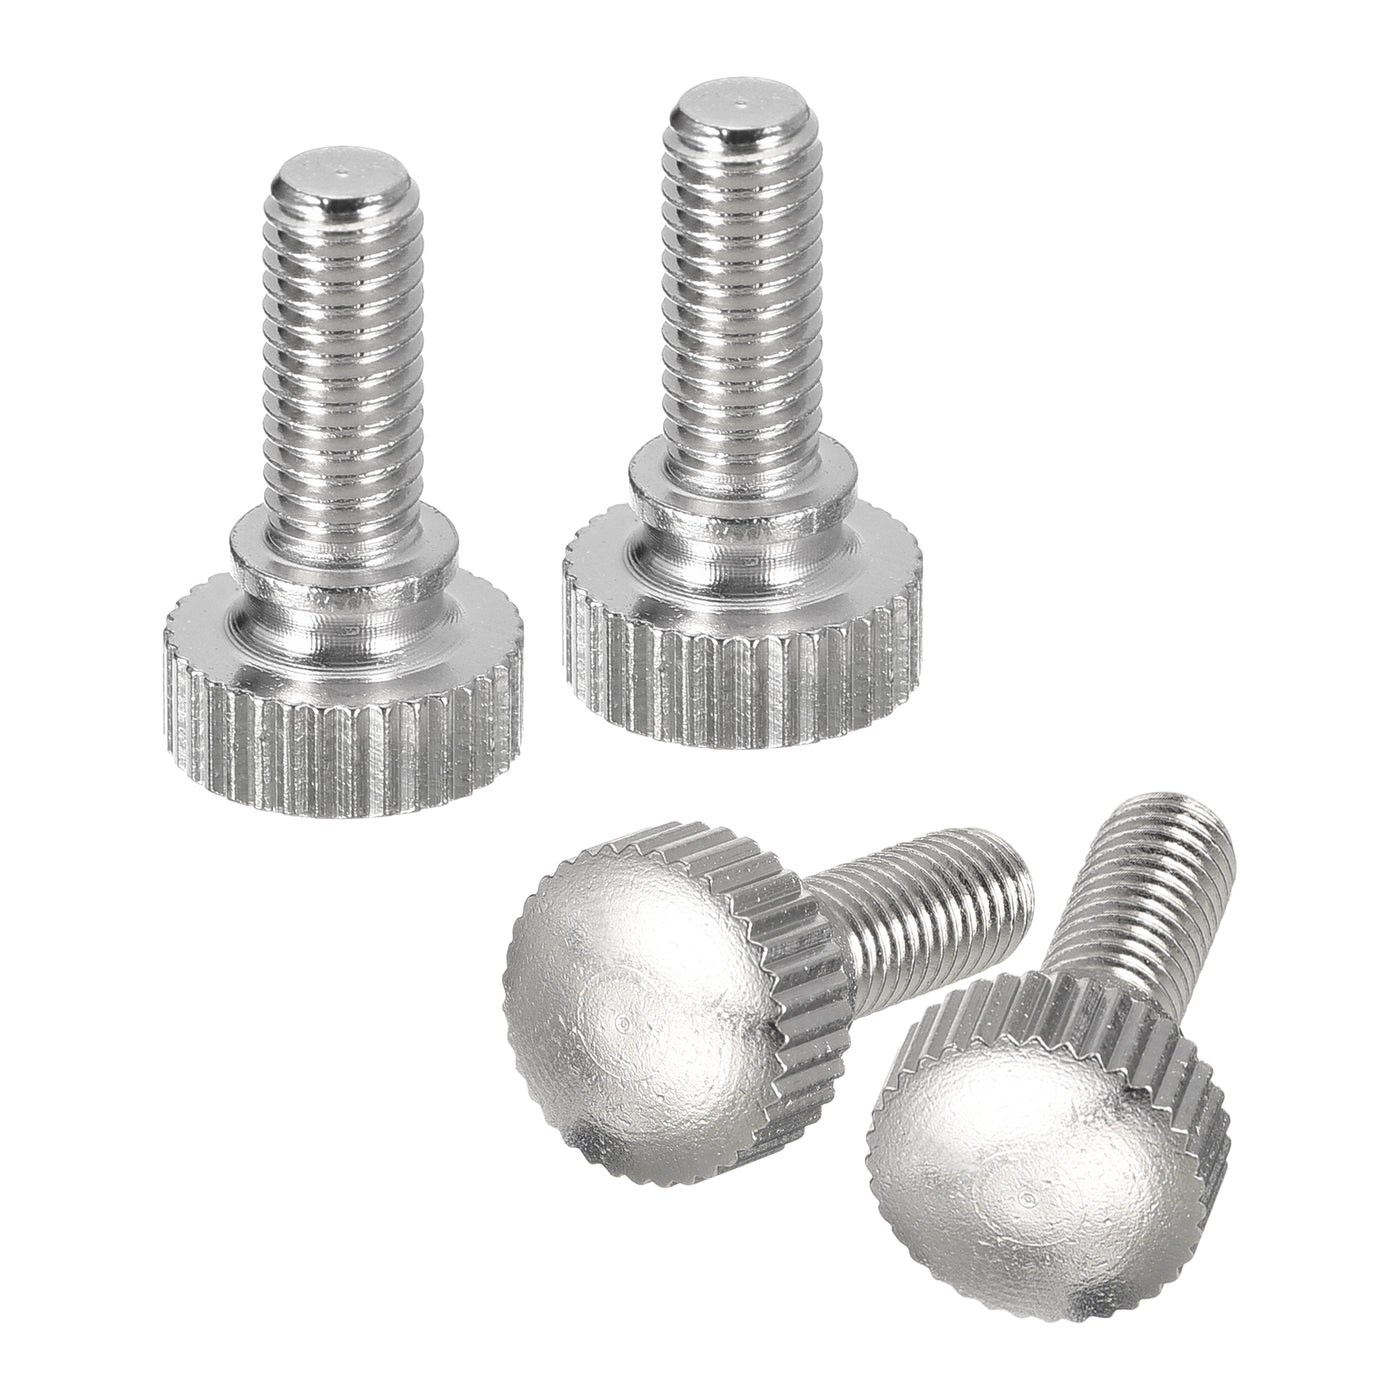 uxcell Uxcell M5x12mm Knurled Thumb Screws, 4pcs Brass Thumb Screws with Shoulder, Silver Tone